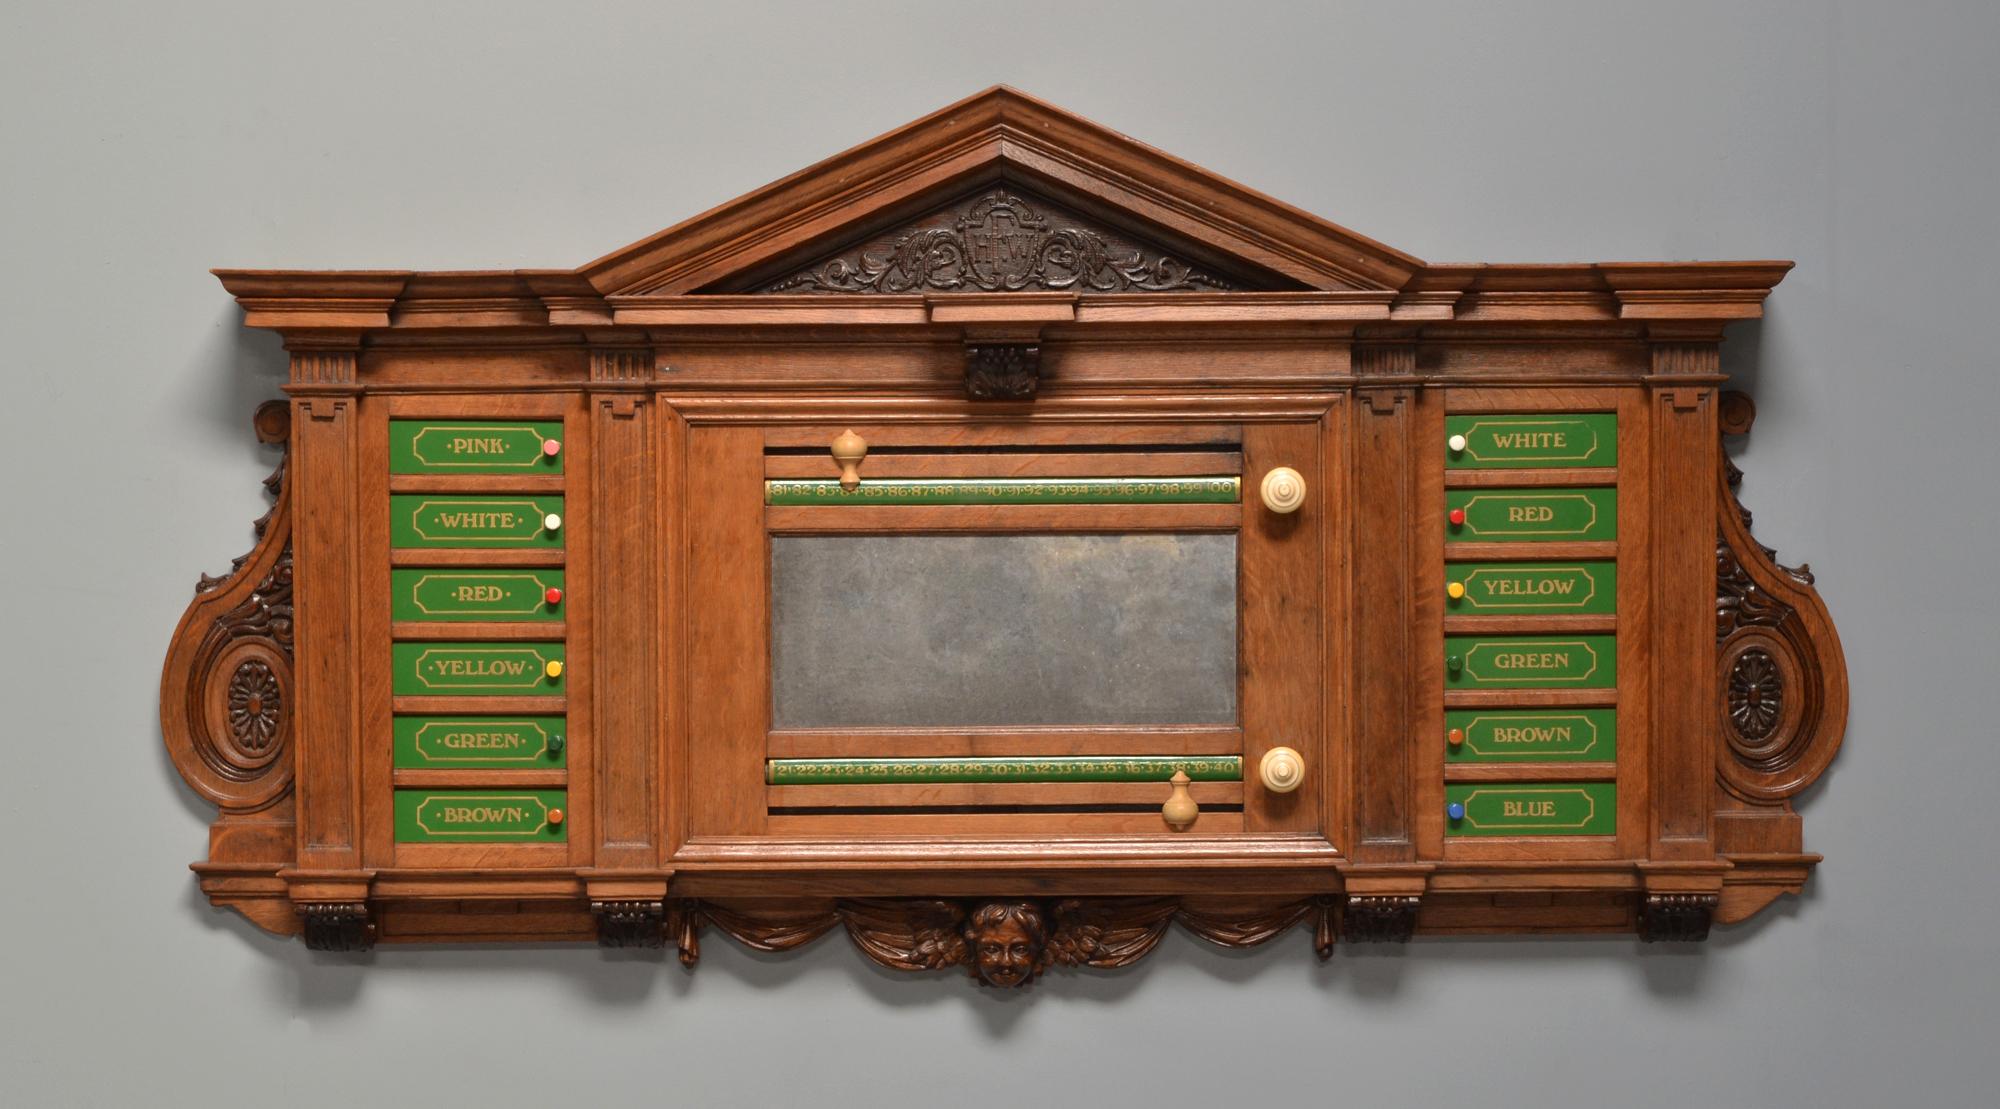 A very rare decorative scoring board circa 1890 featuring a carved cherub, almost certainly a commissioned piece.

Constructed from English oak with equisite detailing.

Rectangular form with classical upright columns flanked by carved